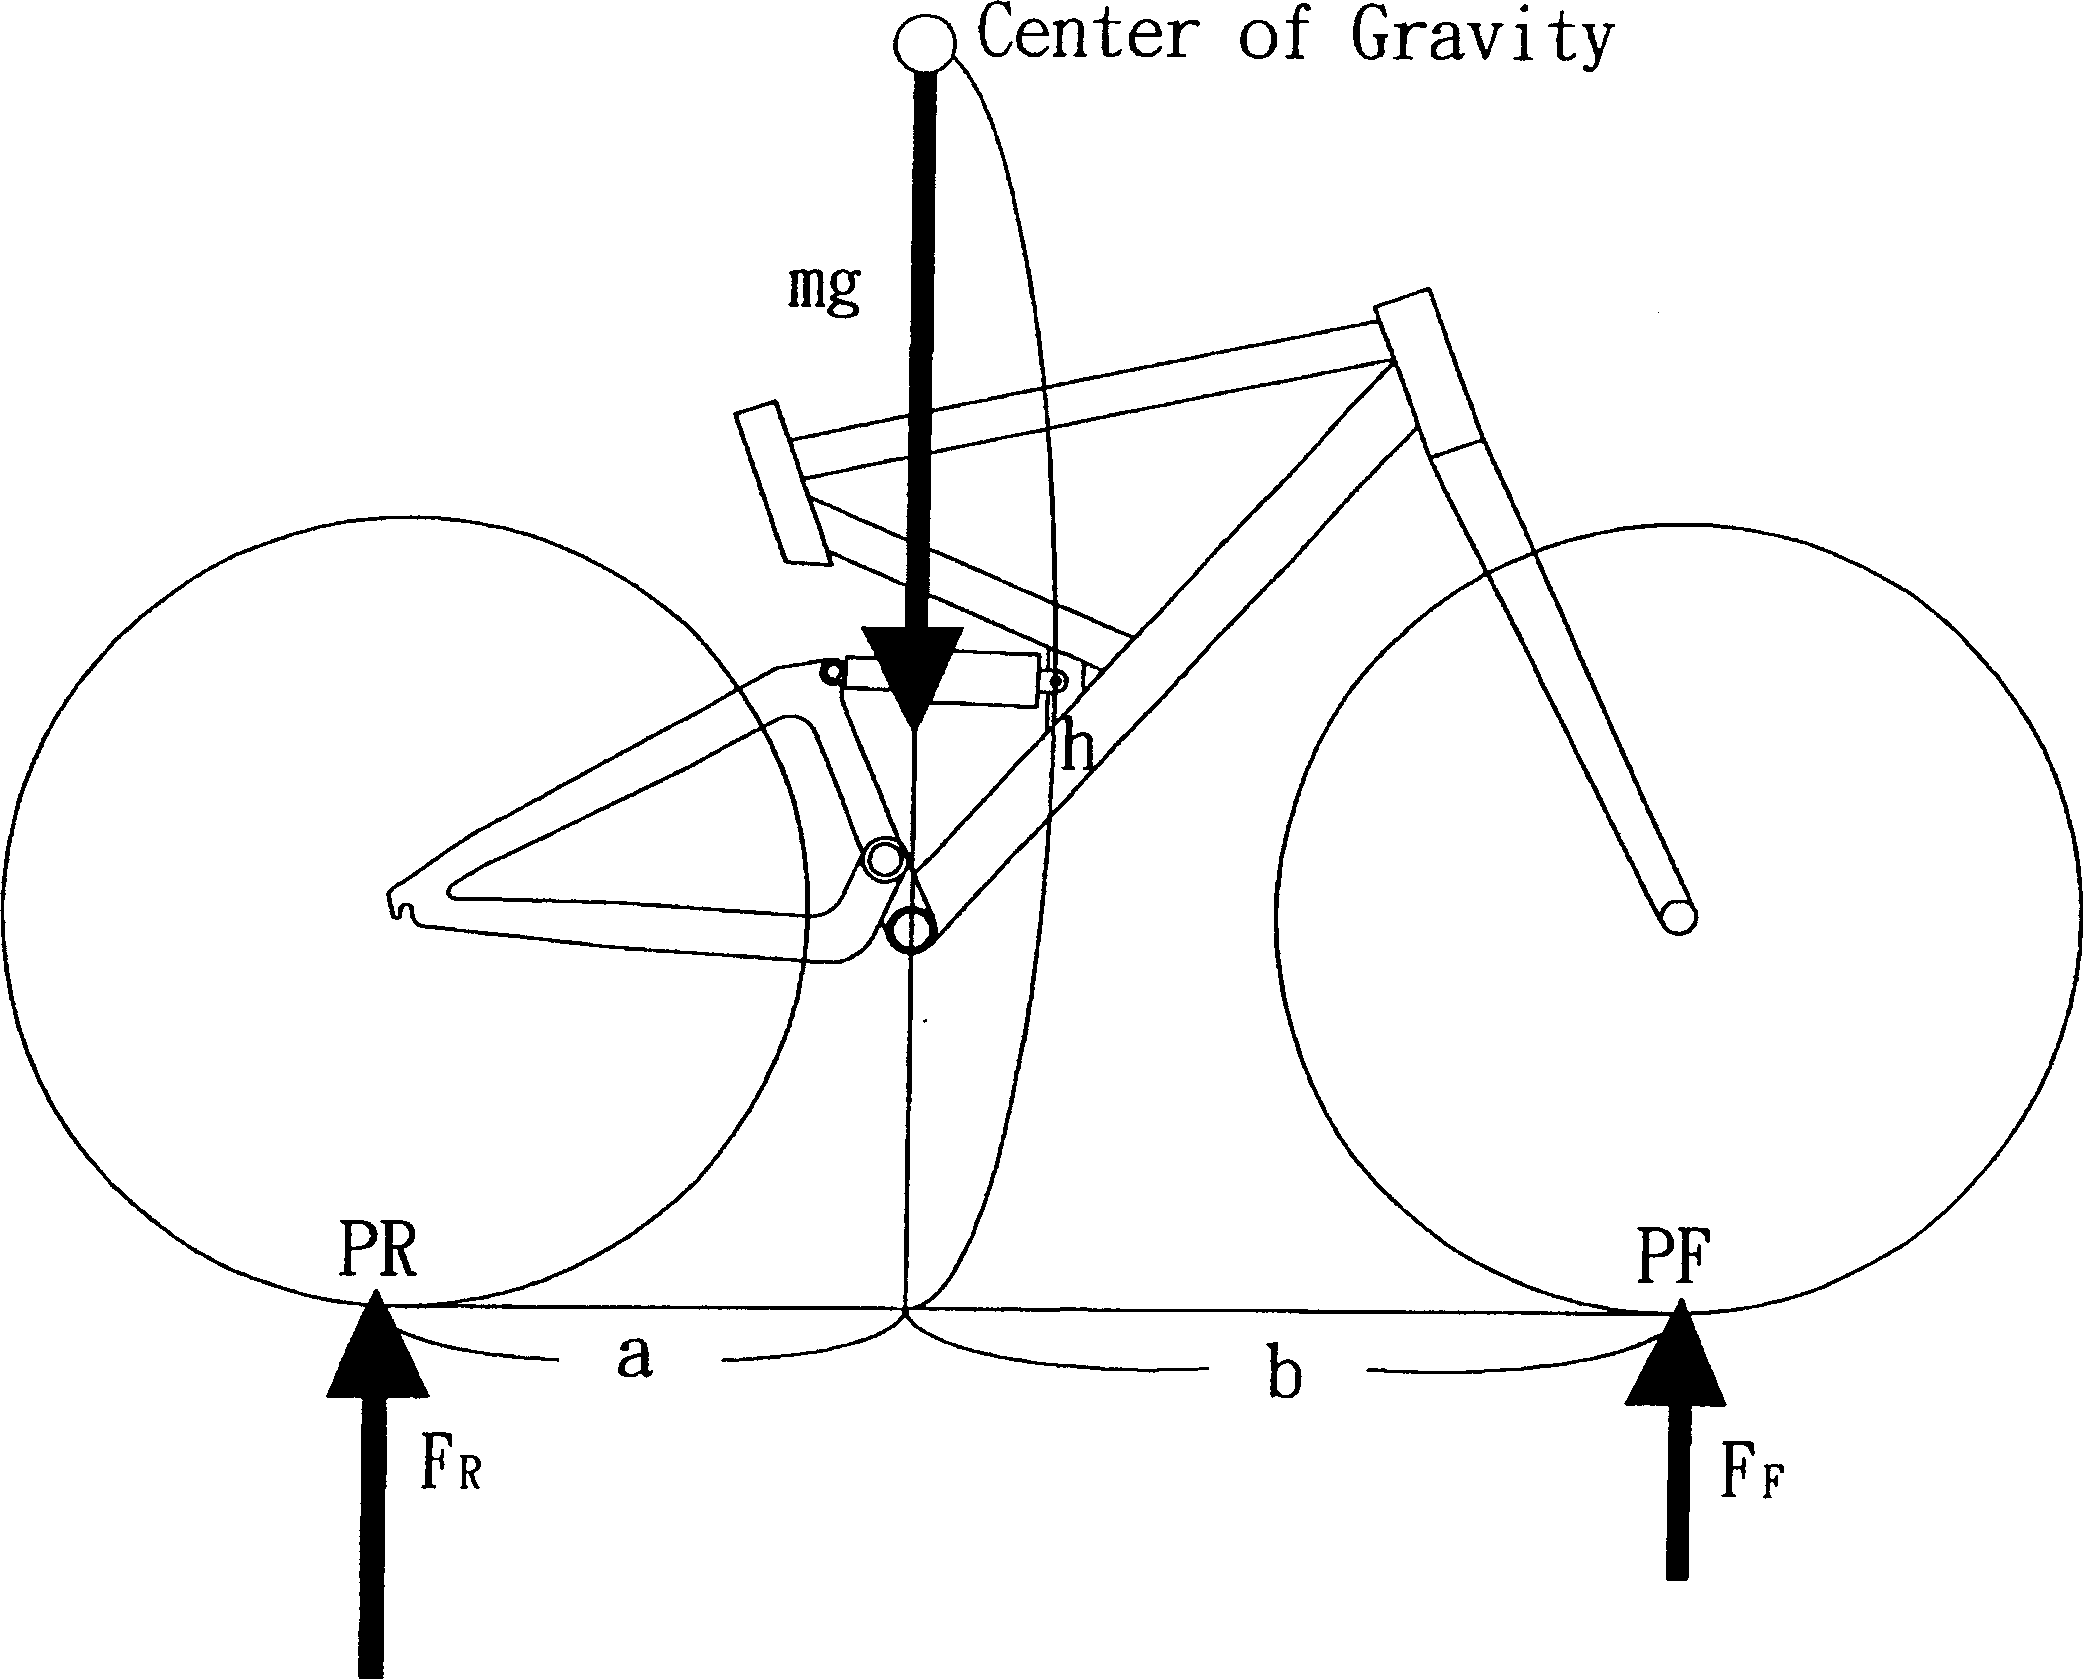 Bicycle with rear suspension avoiding vibration